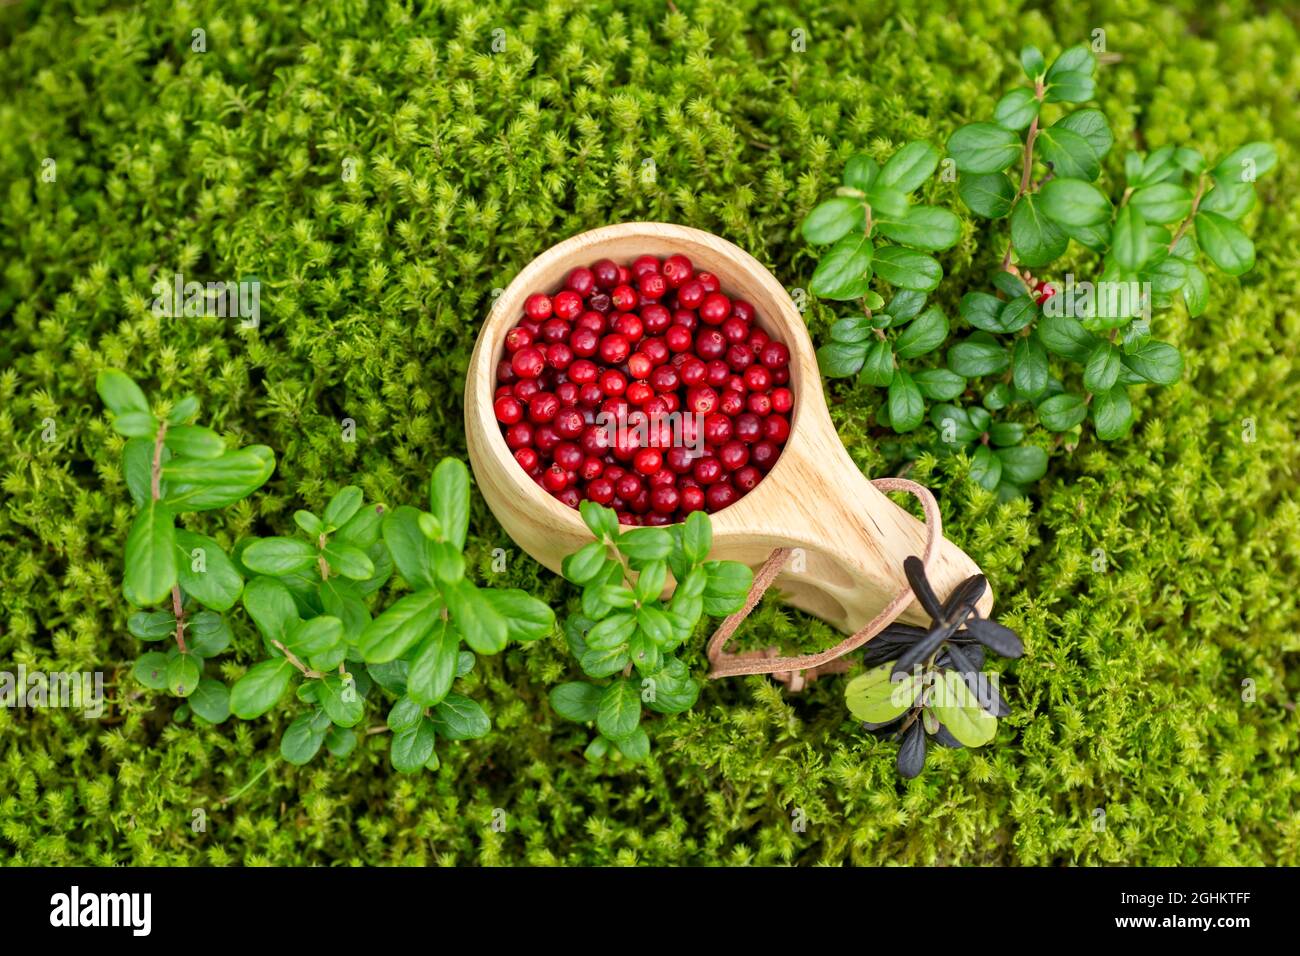 Fresh red lingonberries in a wooden mug on soft moss carpet in the woods. Delicious and healthy organic food concept. Stock Photo